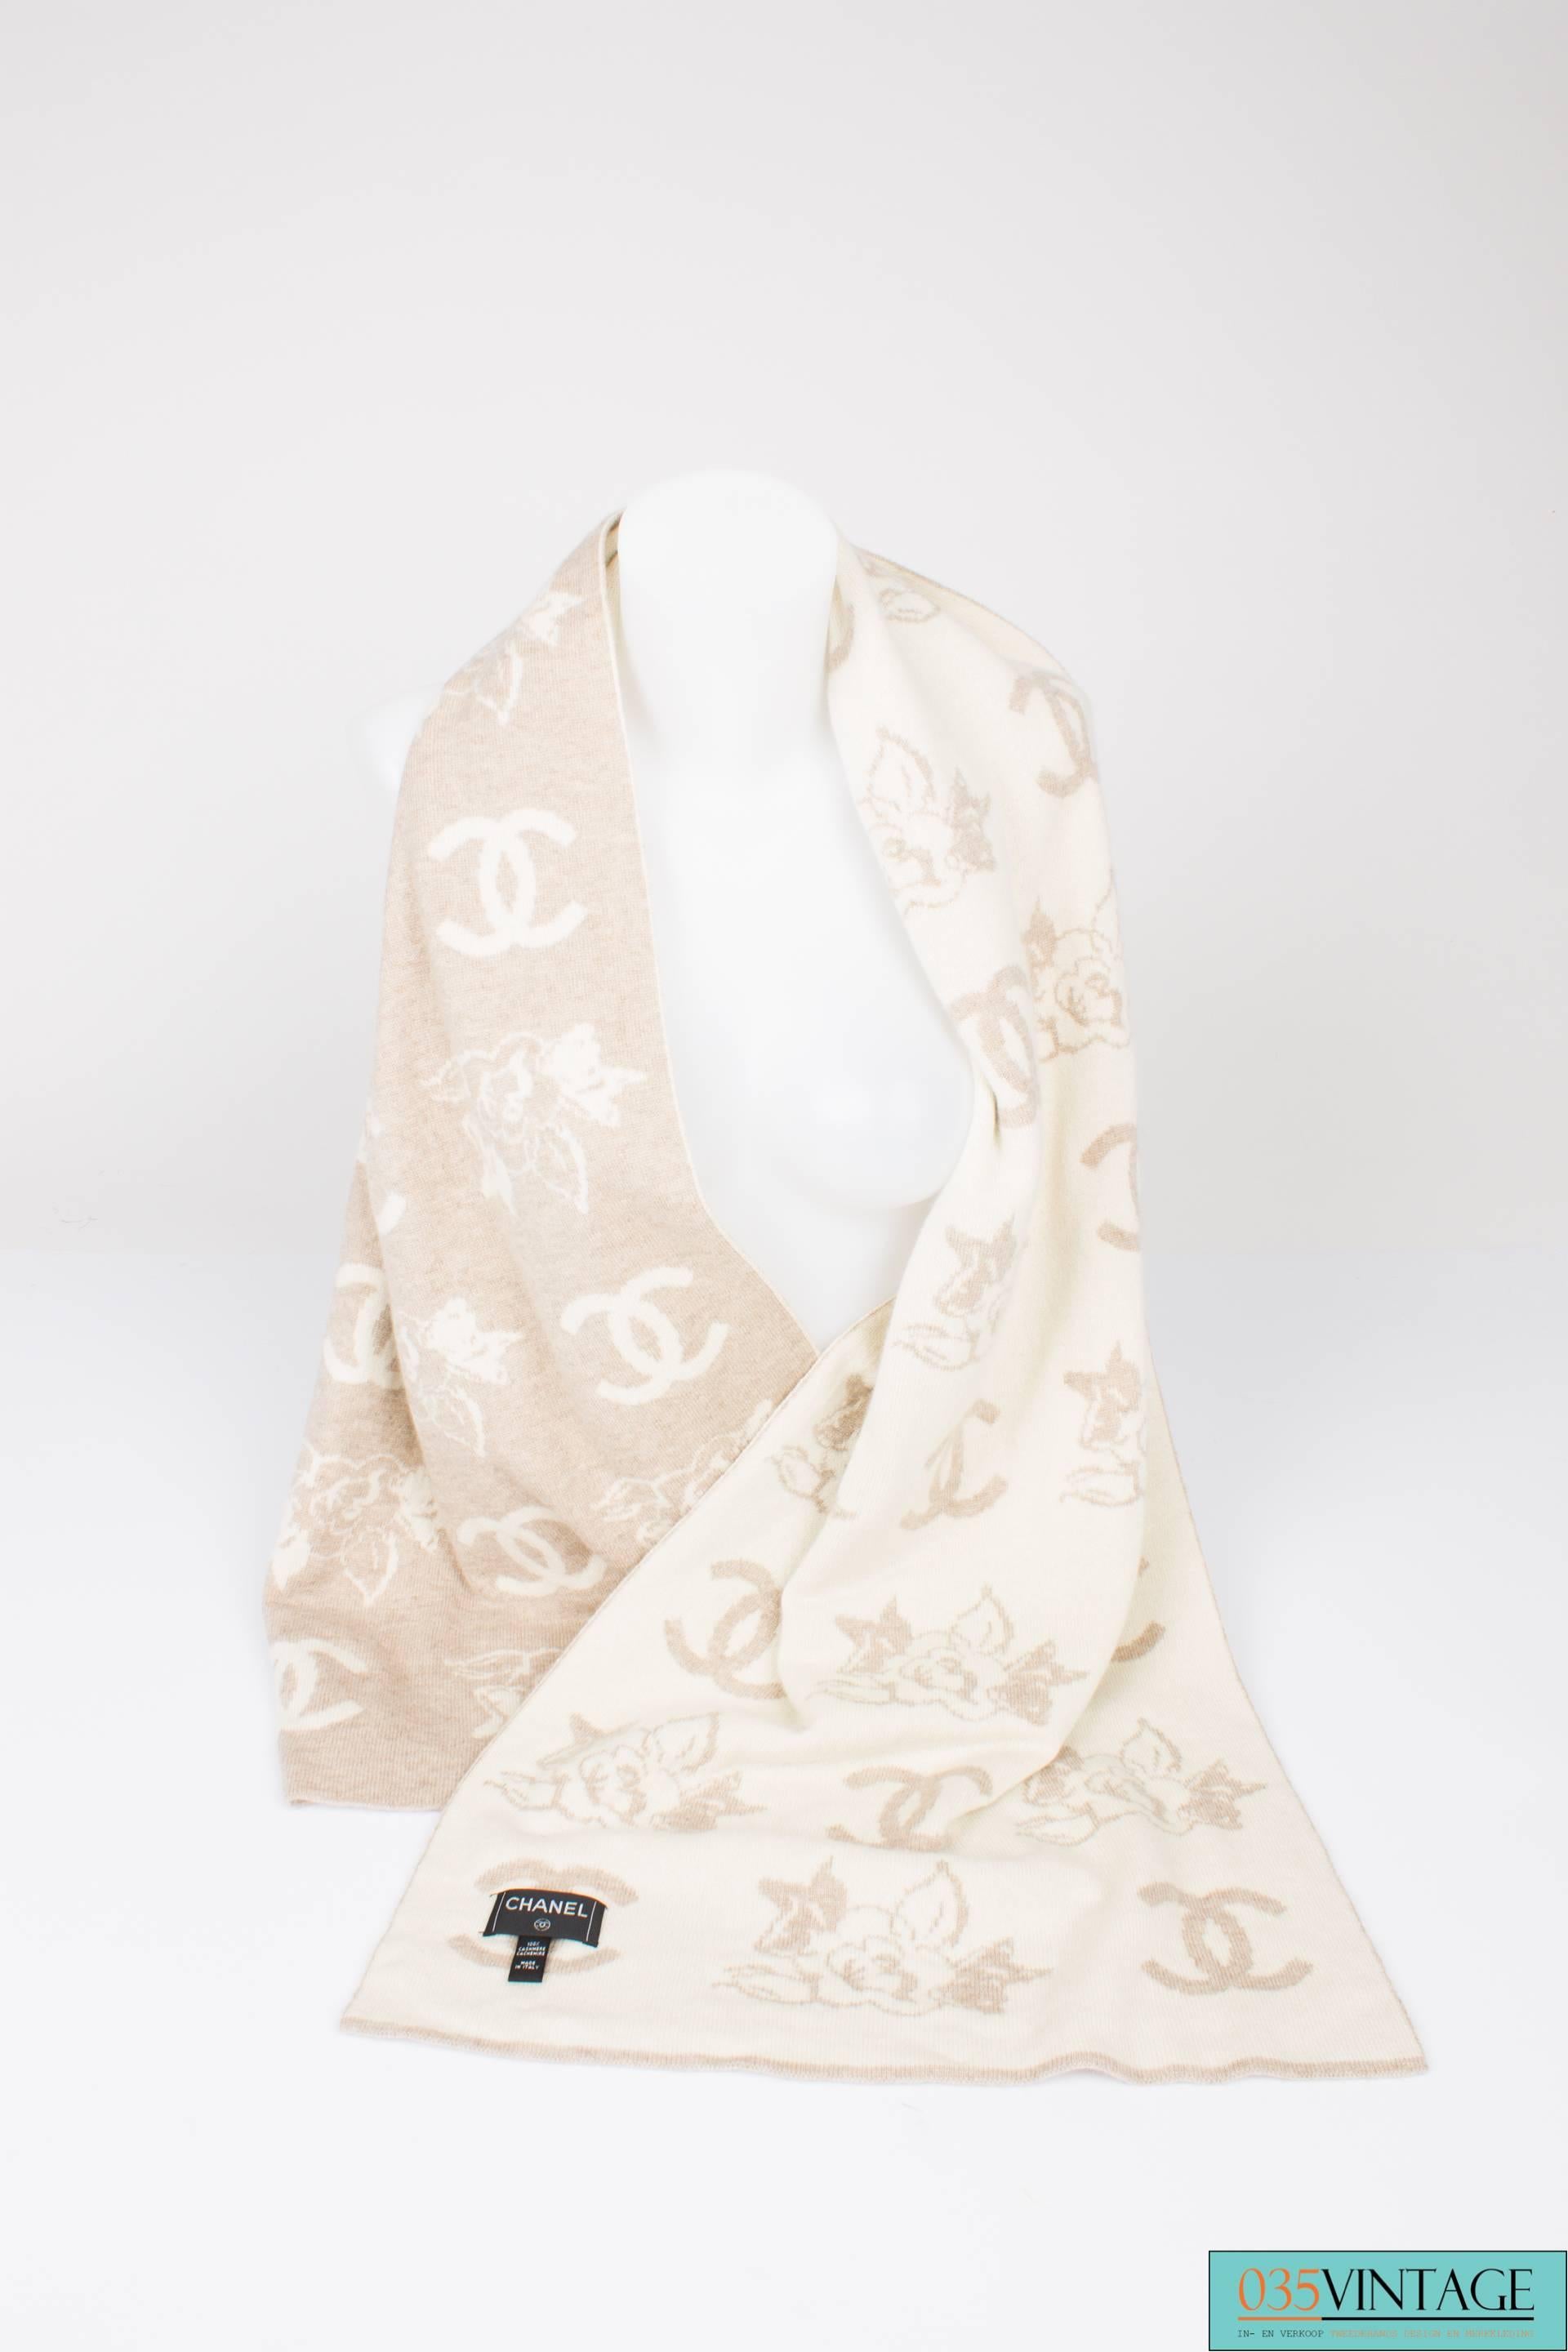 Nice and warm knitted scarf by Chanel in 100% cashmere!

This scarf is rather big, 190 x 46 centimeters and covered with interlocking CC's and camellia flowers. On one side colored beige, on the other side off-white.

MaterIal: cashmere

Made